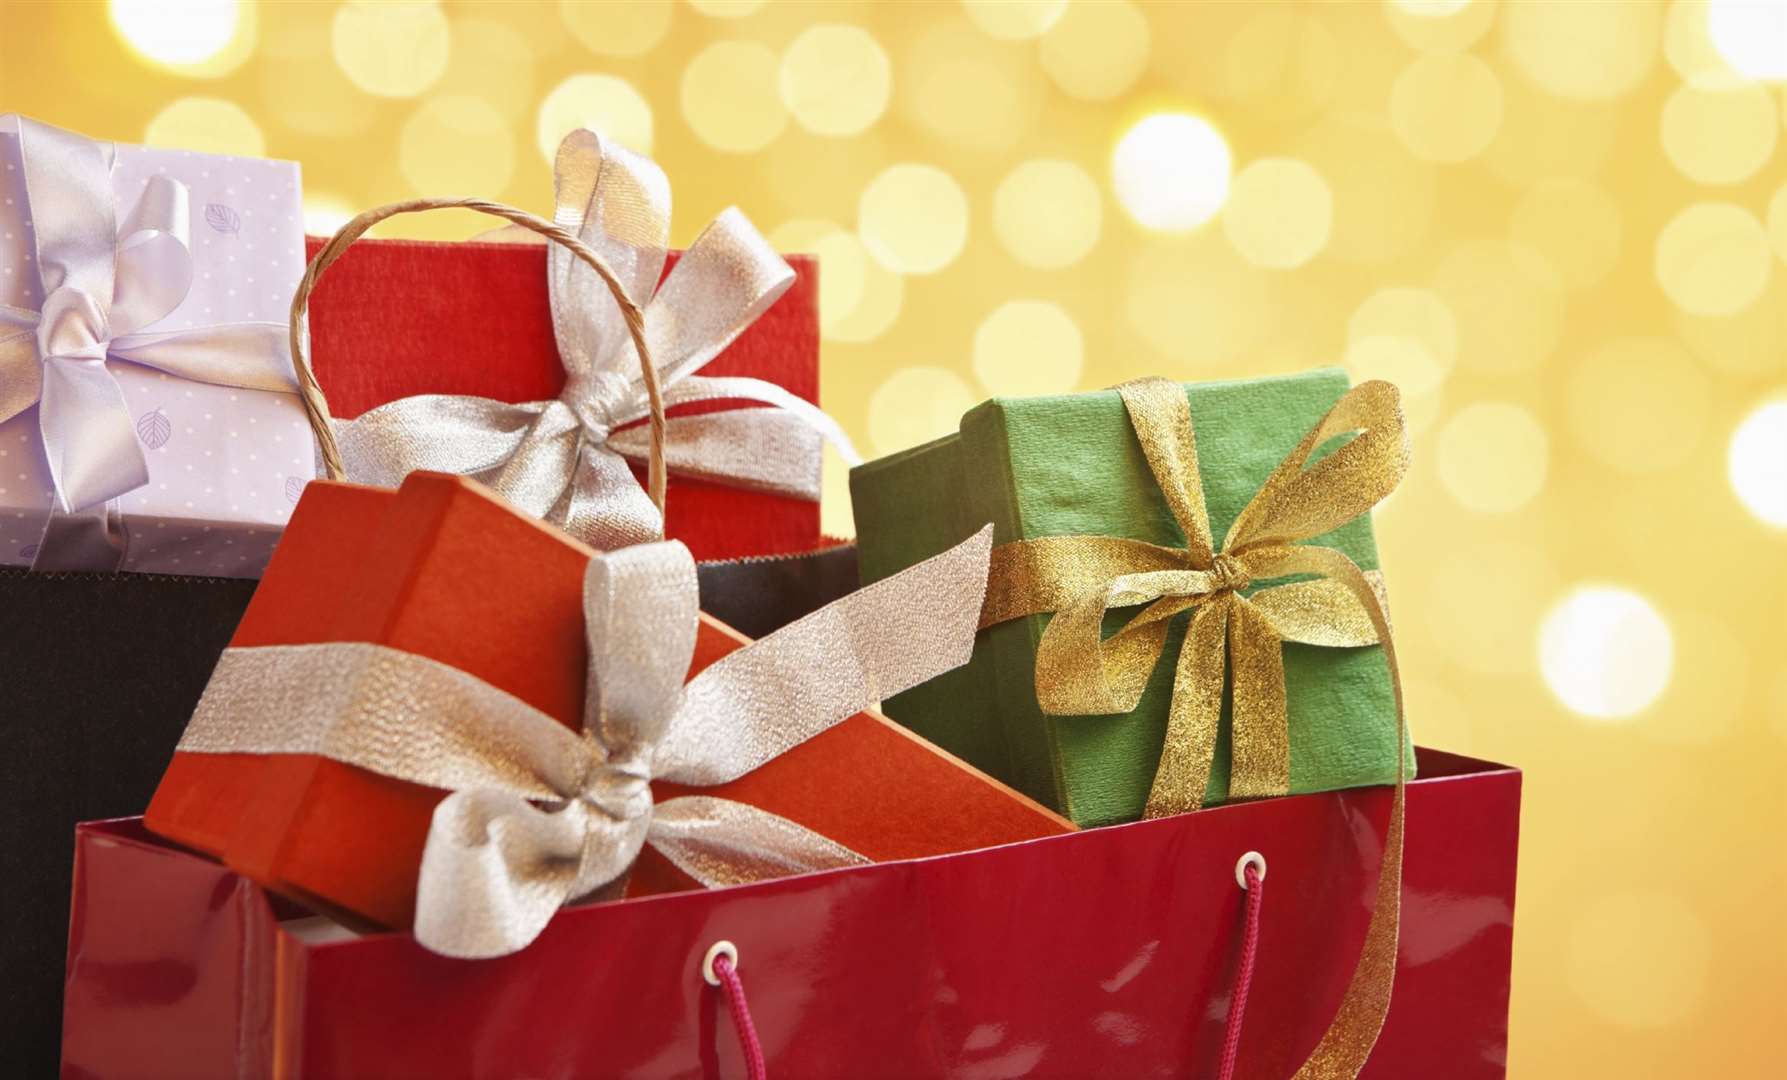 Getting those presents are essential – the question is do you do it on or off-line?